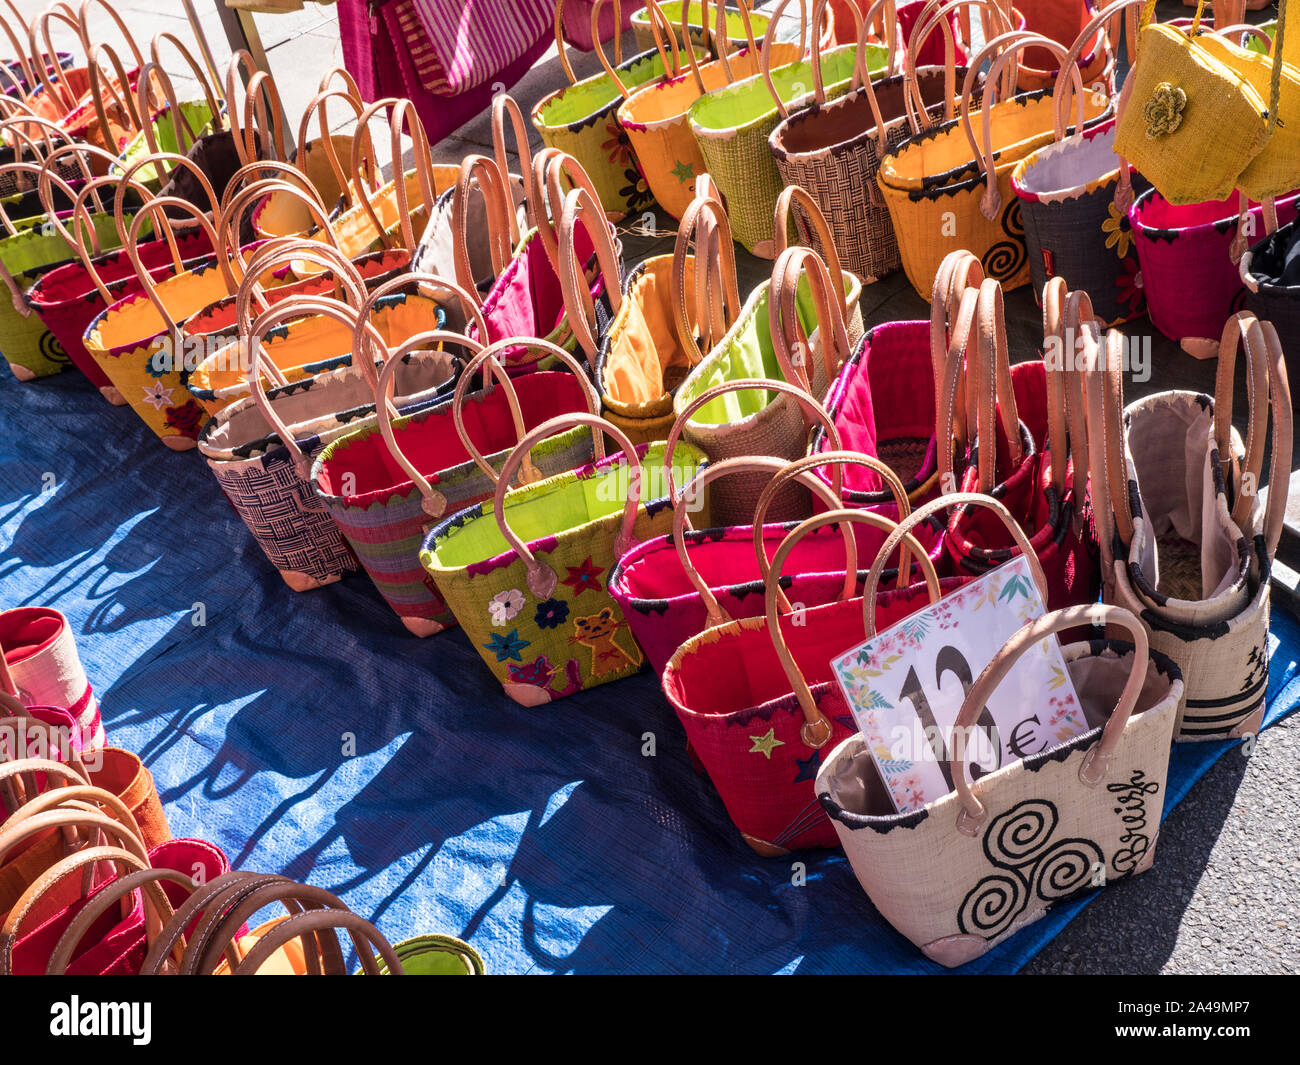 BASKETWARE SHOPPING BAGS MARKET 13€ DISPLAY OUTDOORS SUNLIT Breton Nevéz Brittany Street Market Charming French Breton weekly general market in church square selling local produce such as basketware etc in Névez Brittany France Stock Photo